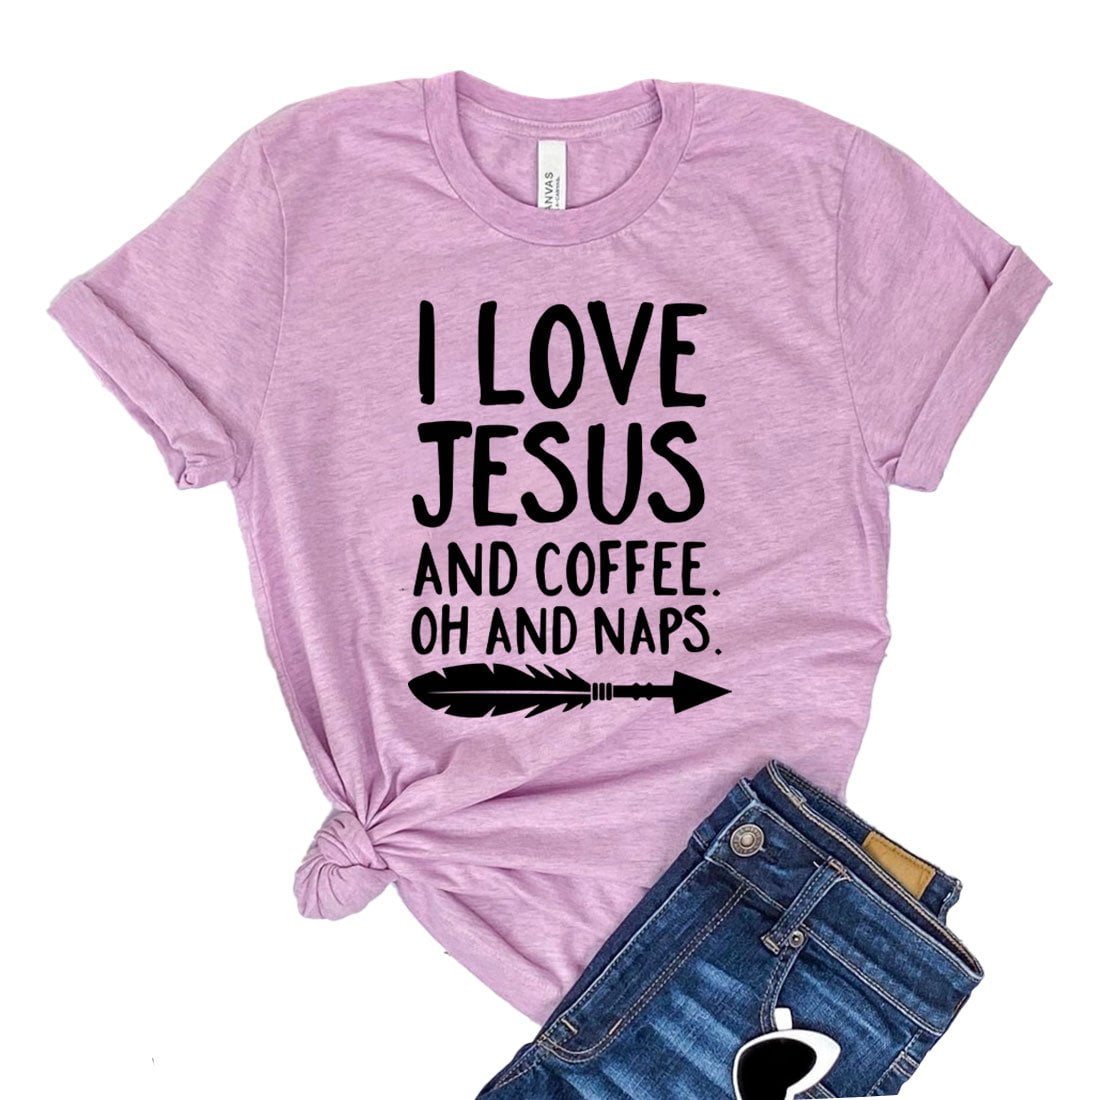 Coffee T Shirts for Women Coffee Letters Print Shirt Casual Funny Sayings Graphic Tee Shirt Top